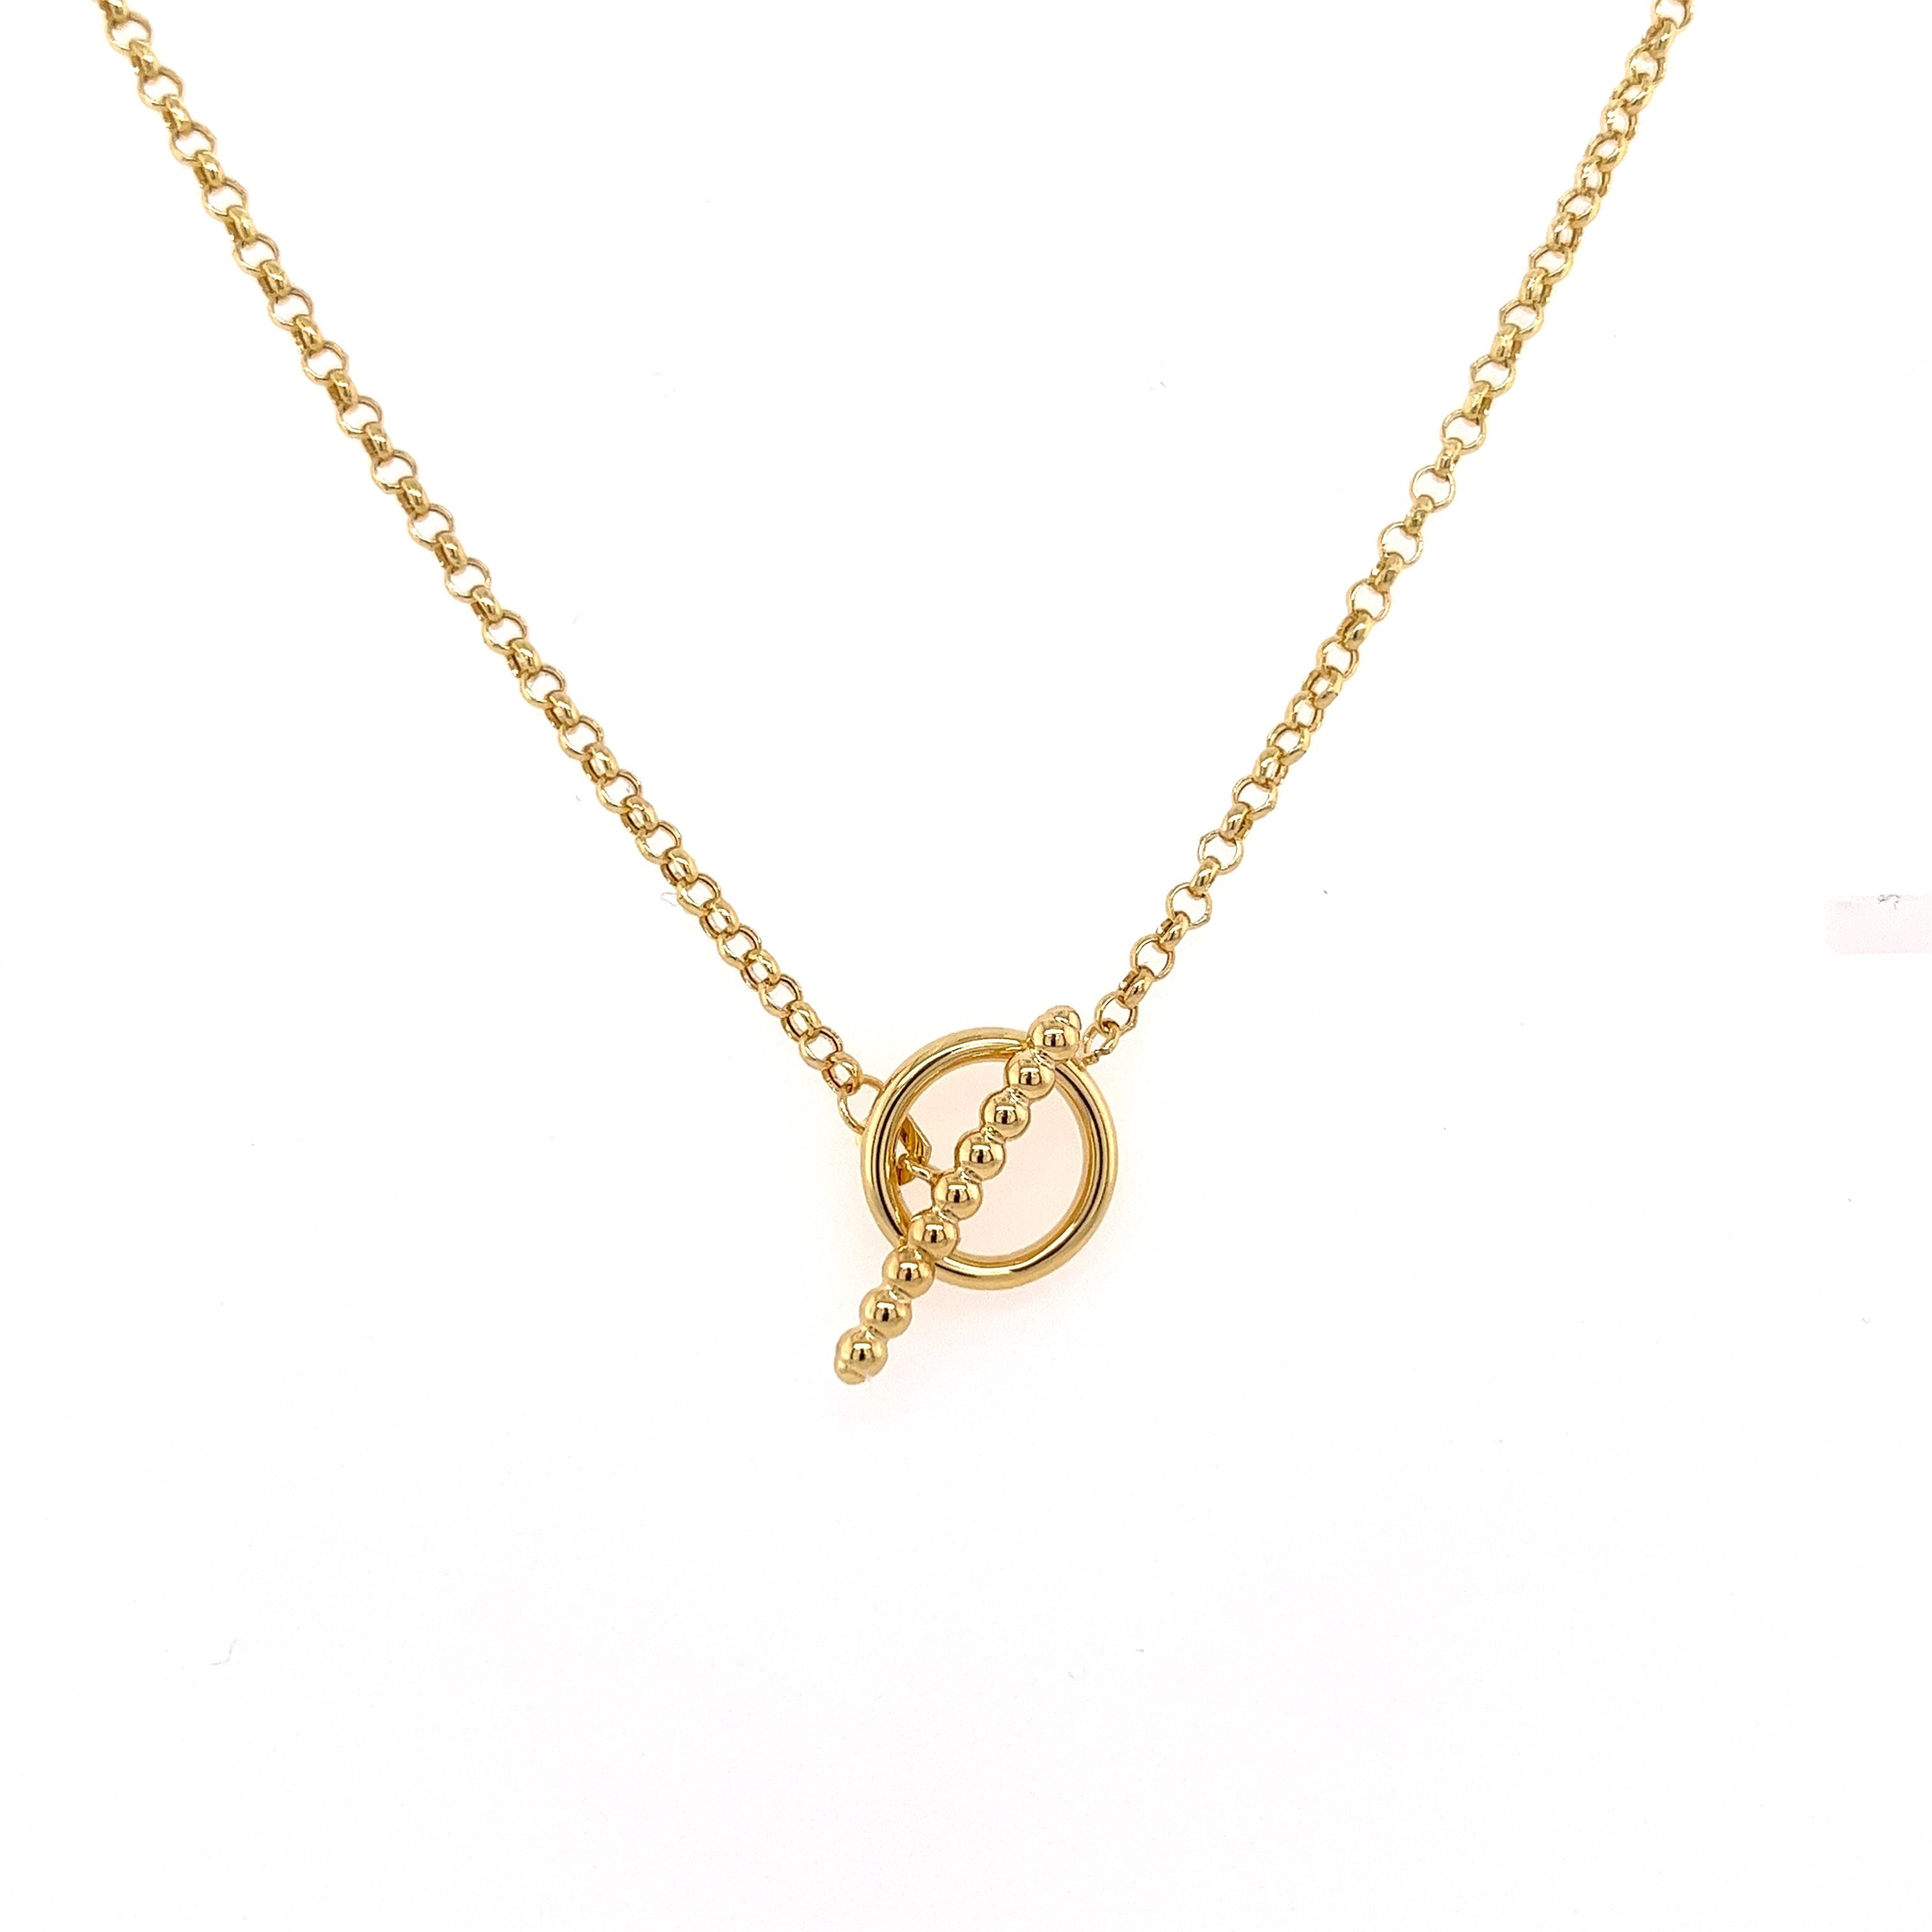 14K-Gold-Bar-and-Toggle-Chain-Necklace-18-Inches-1_5mm-Chains.jpg